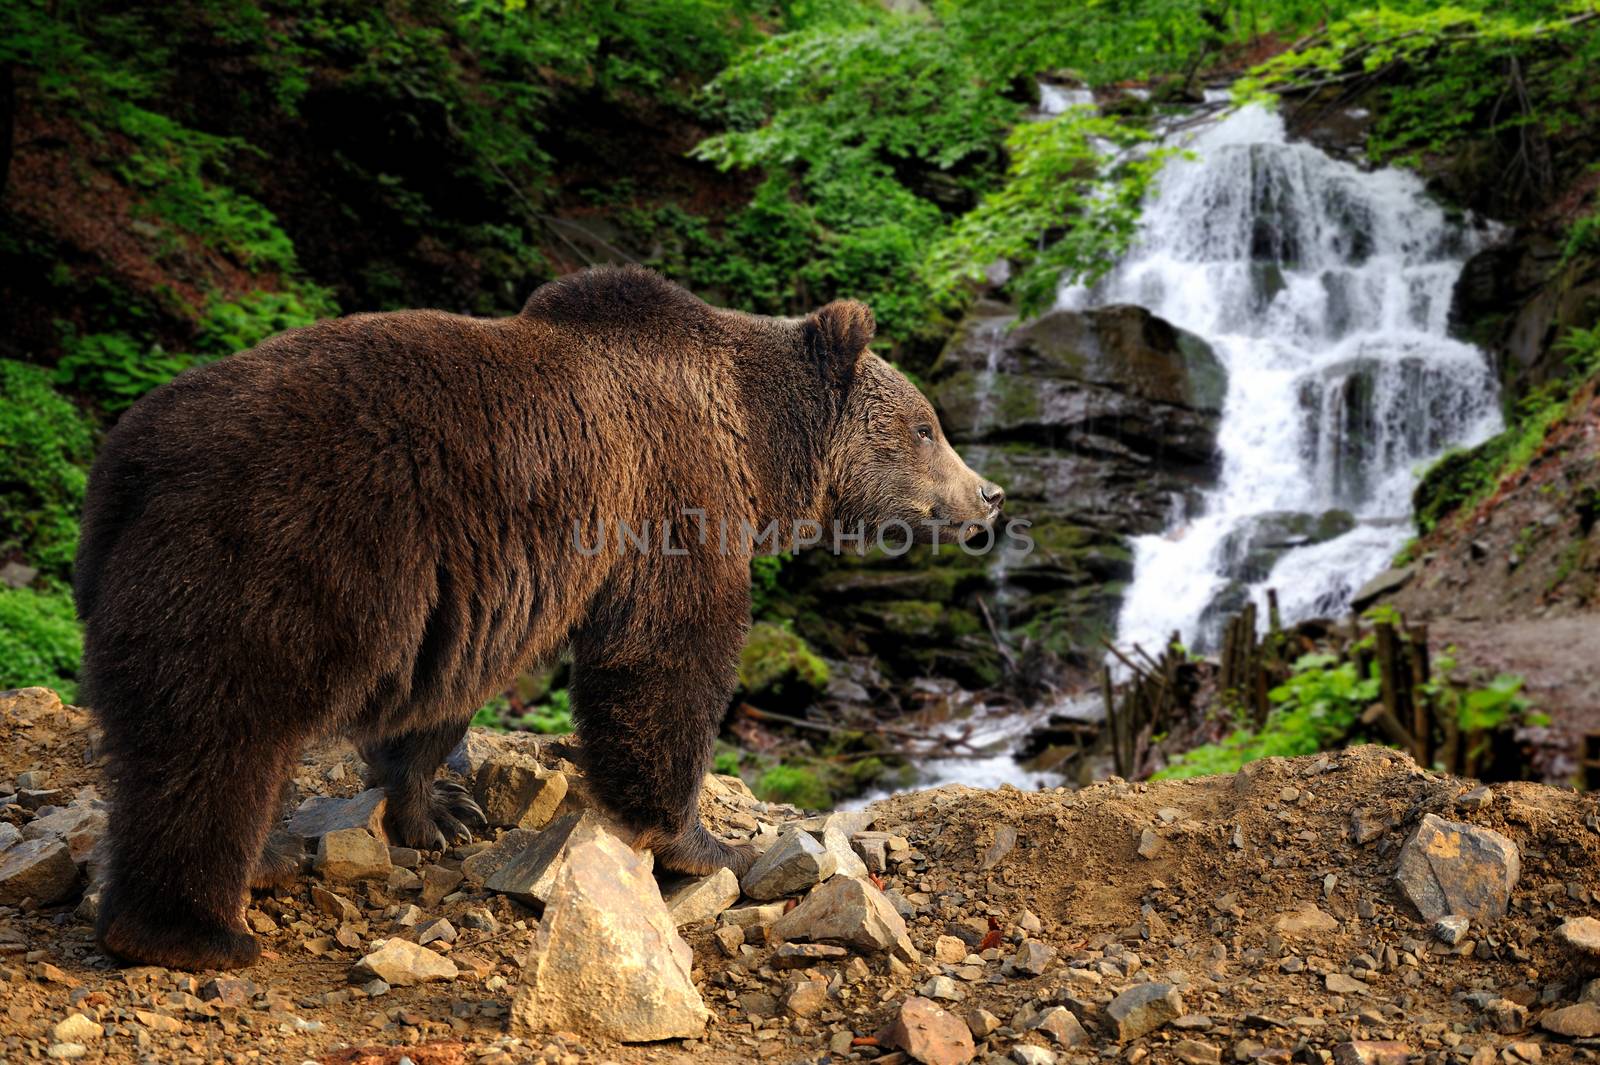 Big brown bear standing on a rock near a waterfall in the forest